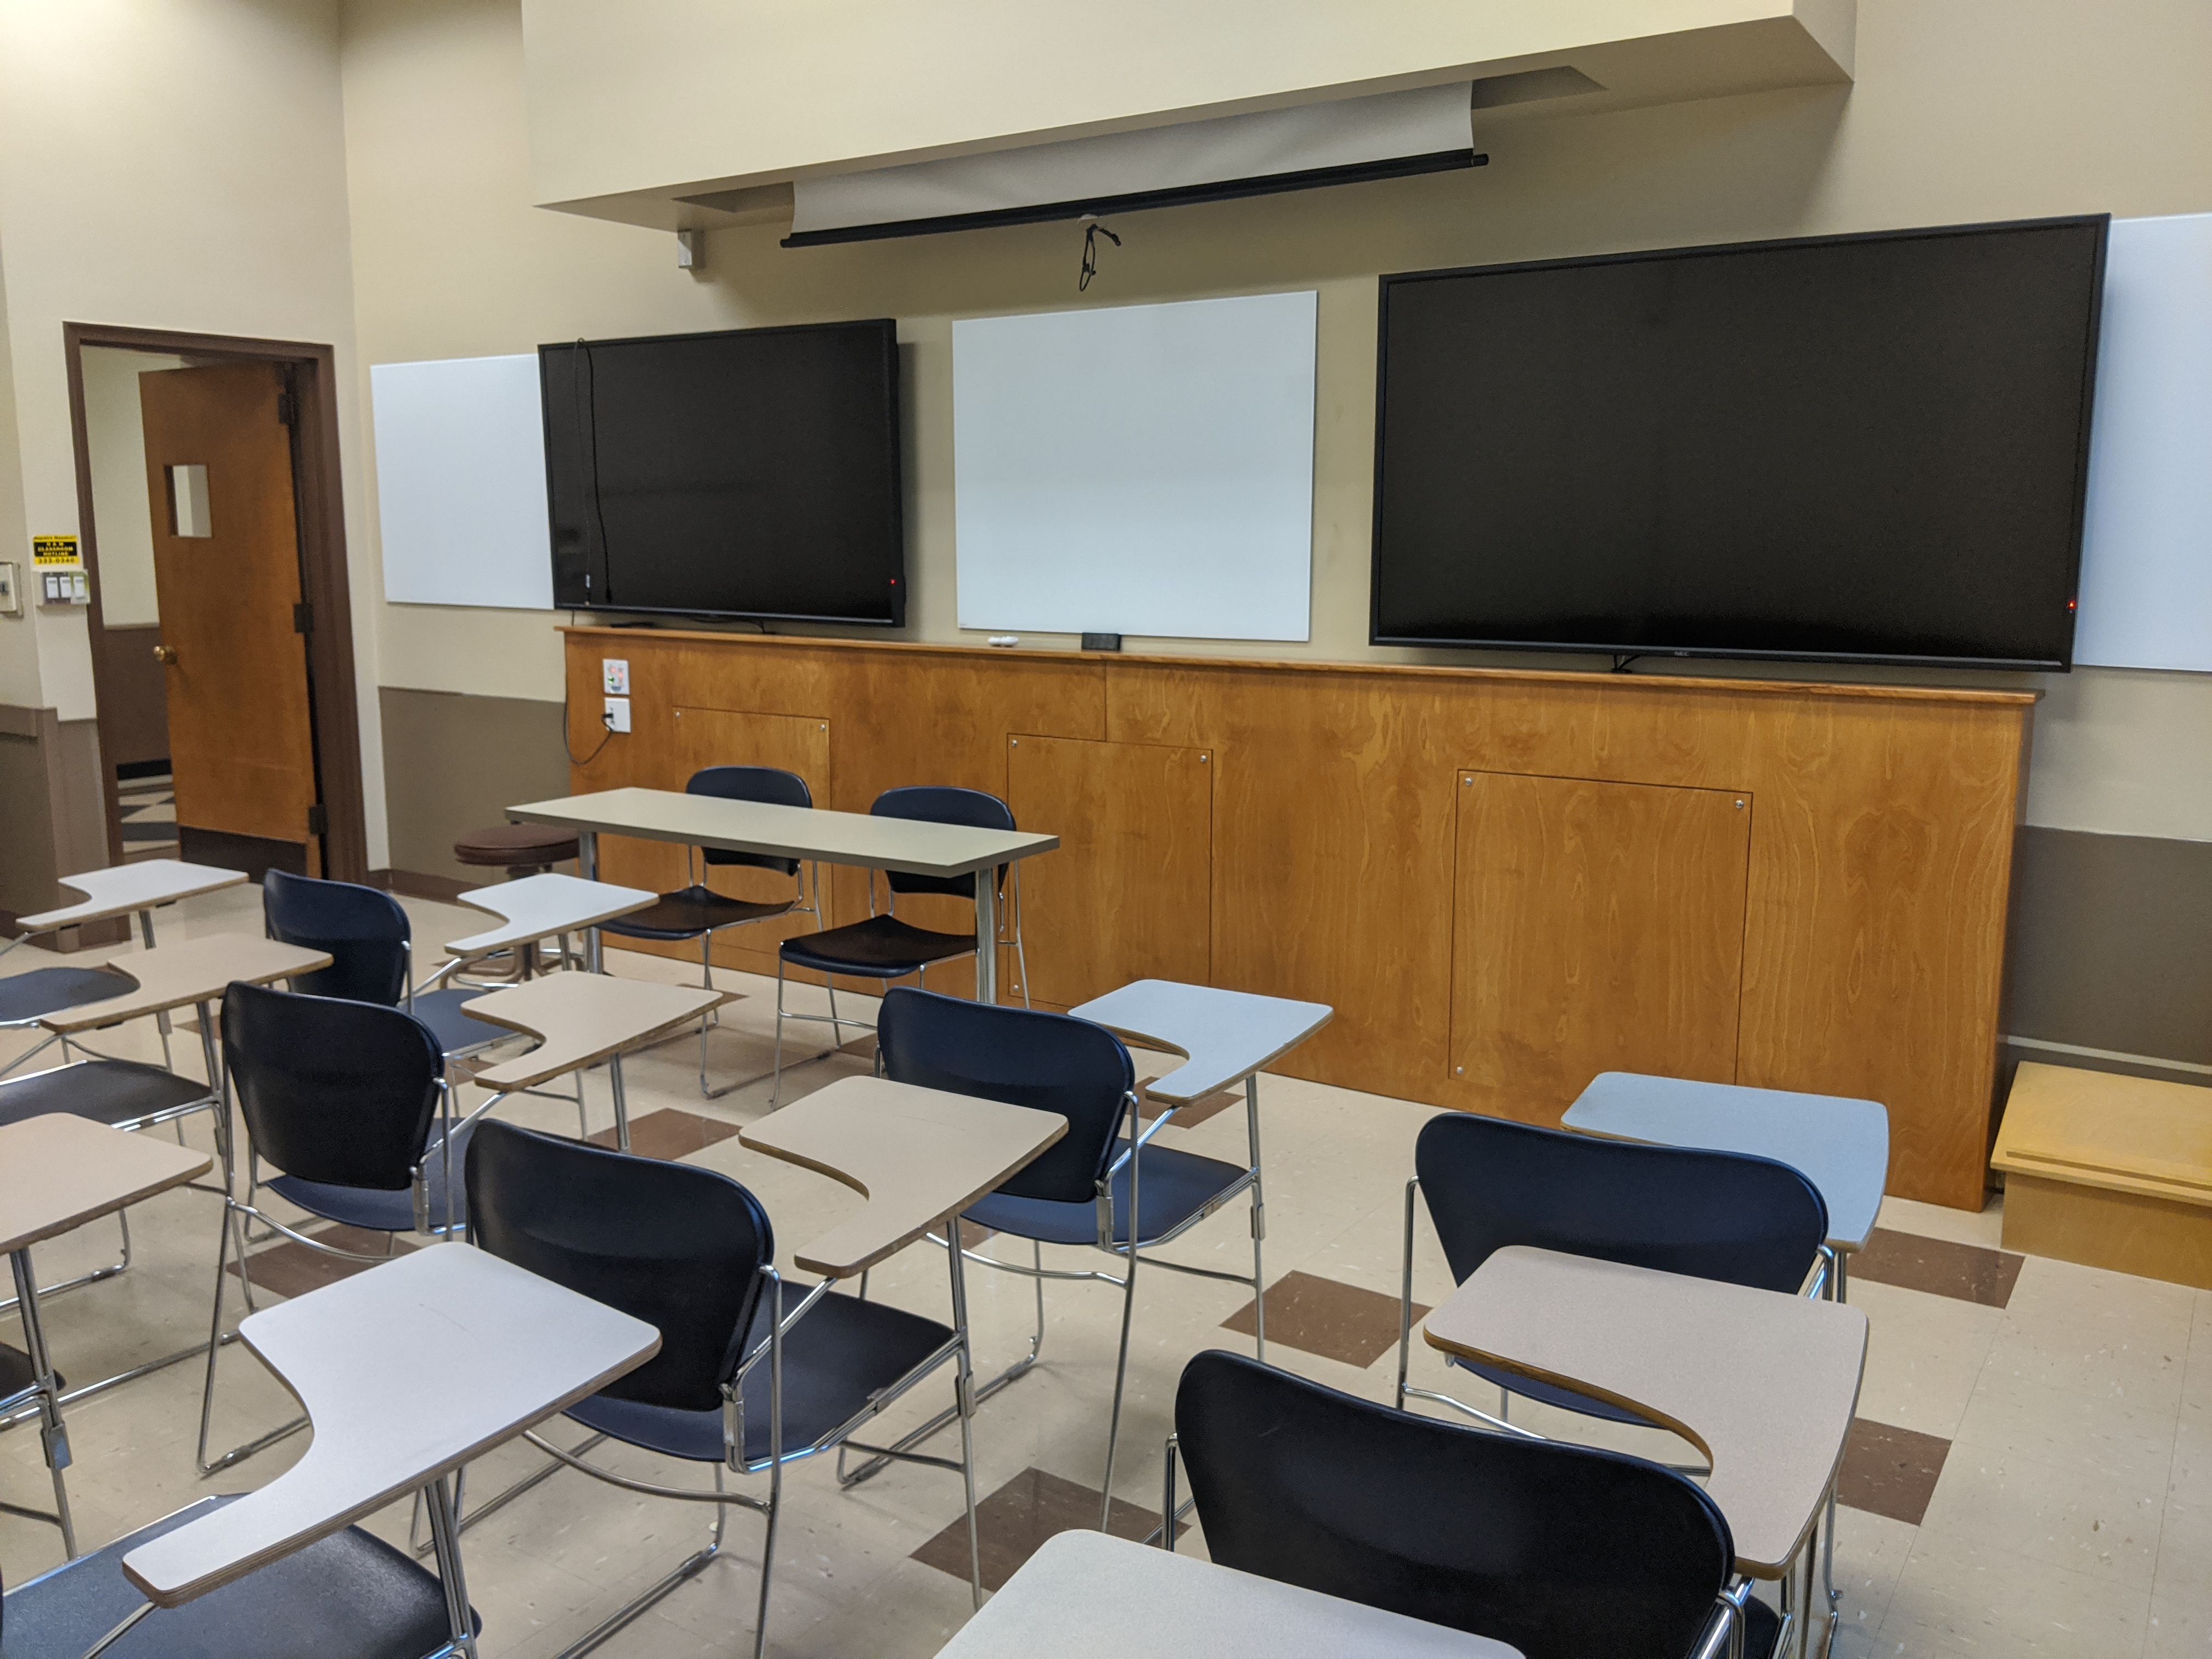 A view of the classroom with moveable tablet arm chairs, LCD wall monitors, whiteboards, and instructor table in front.